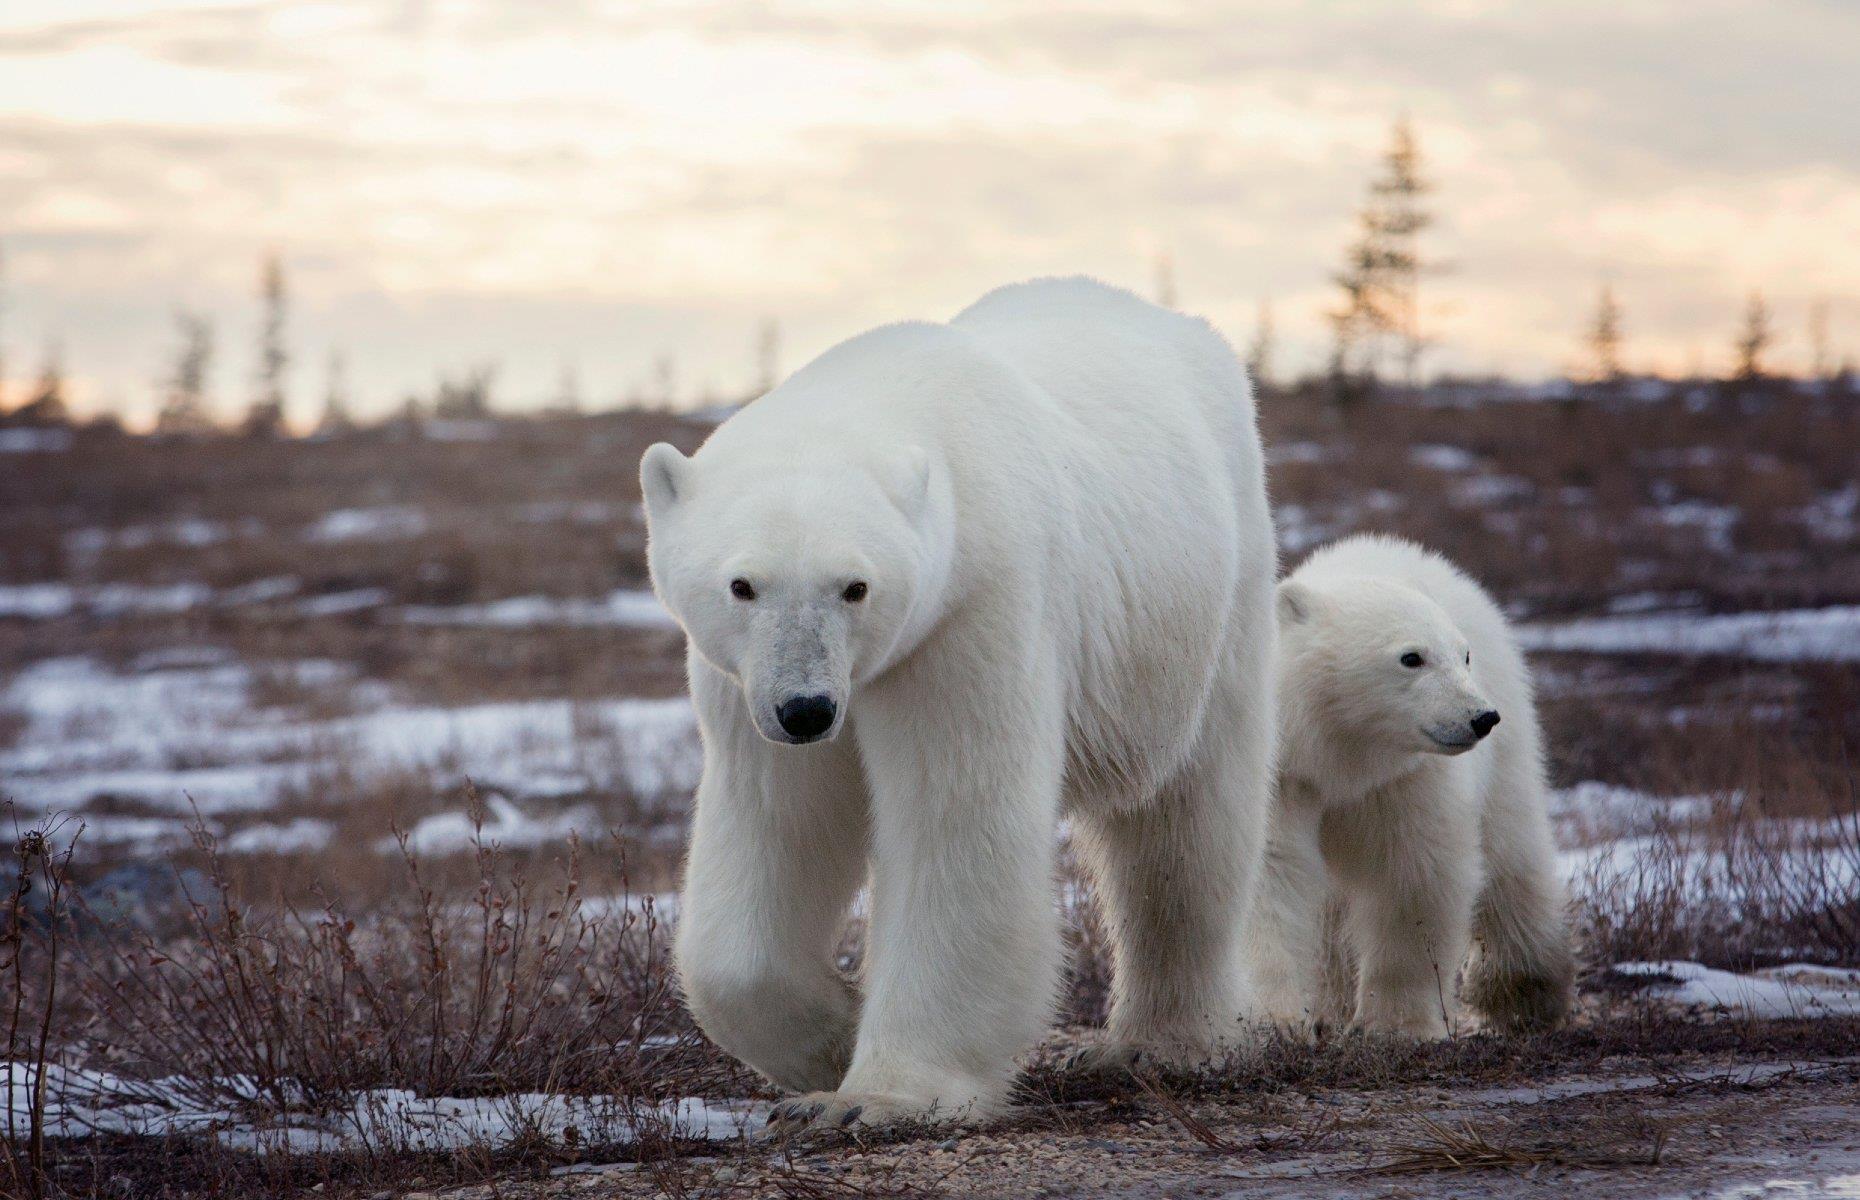 <p>Frontiers North (as well as its beluga whale experience) offers a polar bear conservation journey during the autumn. Guests will meet a Polar Bears International scientist and get access to the Wildlife Management Area, where the season's highest concentration of polar bears can be found. Inuit-owned <a href="https://subarctictours.ca/about-subarctic">Sub-Arctic Tours</a> specialises in intimate small-group tours, and <a href="https://www.watchee.com/">Wat'chee Expeditions</a> operates a lodge 40 miles (64km) south of Churchill that is open only for a short period every year – encounters with polar bear cubs and mums are said to be "virtually guaranteed” here.</p>  <p><a href="https://www.loveexploring.com/galleries/88525/the-best-wildlife-experiences-in-the-world?page=1"><strong>Now read on for the best wildlife experiences around the world</strong></a></p>